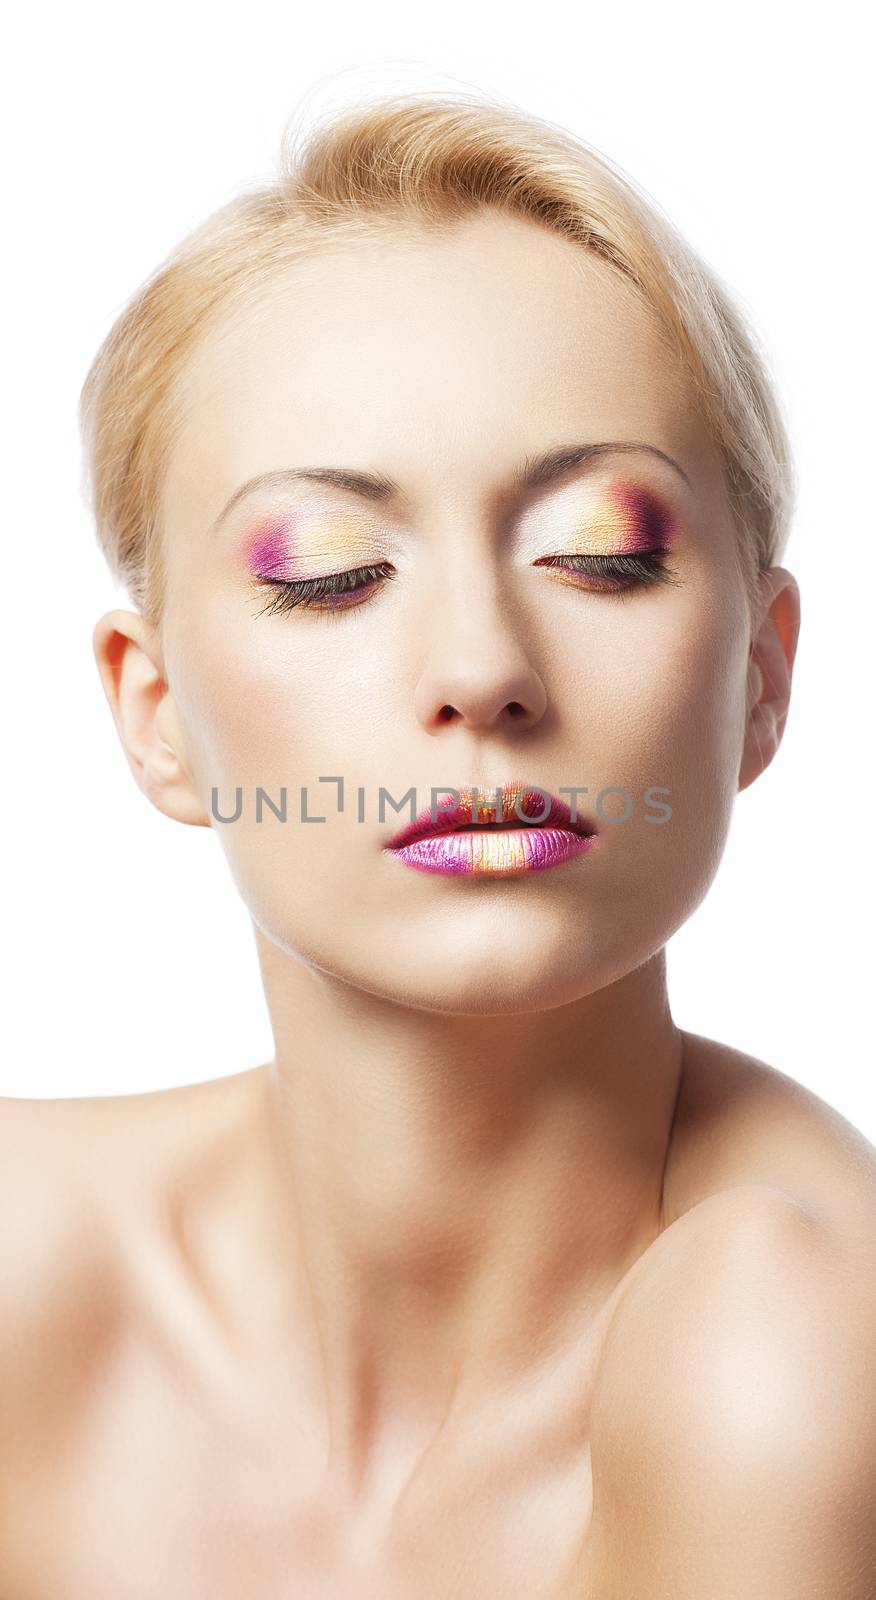 the floral makeup, she is turned of three quarters by fotoCD